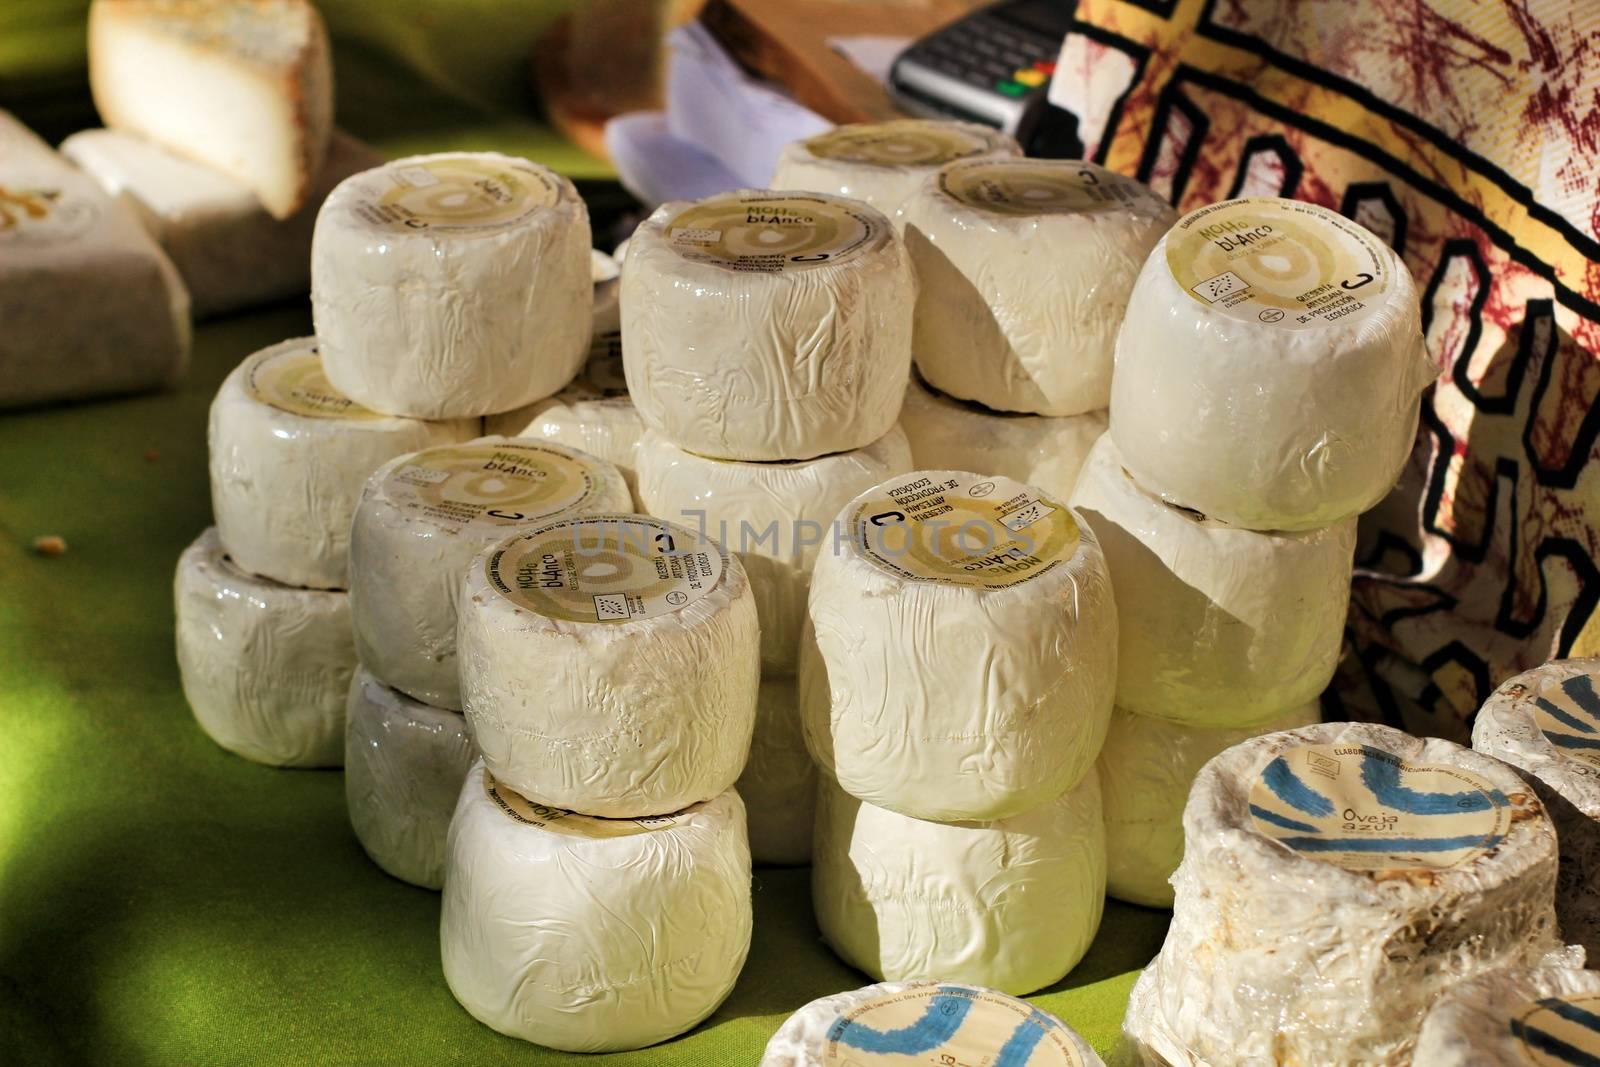 Cheese for sale at the Local ecological market in Elche by soniabonet